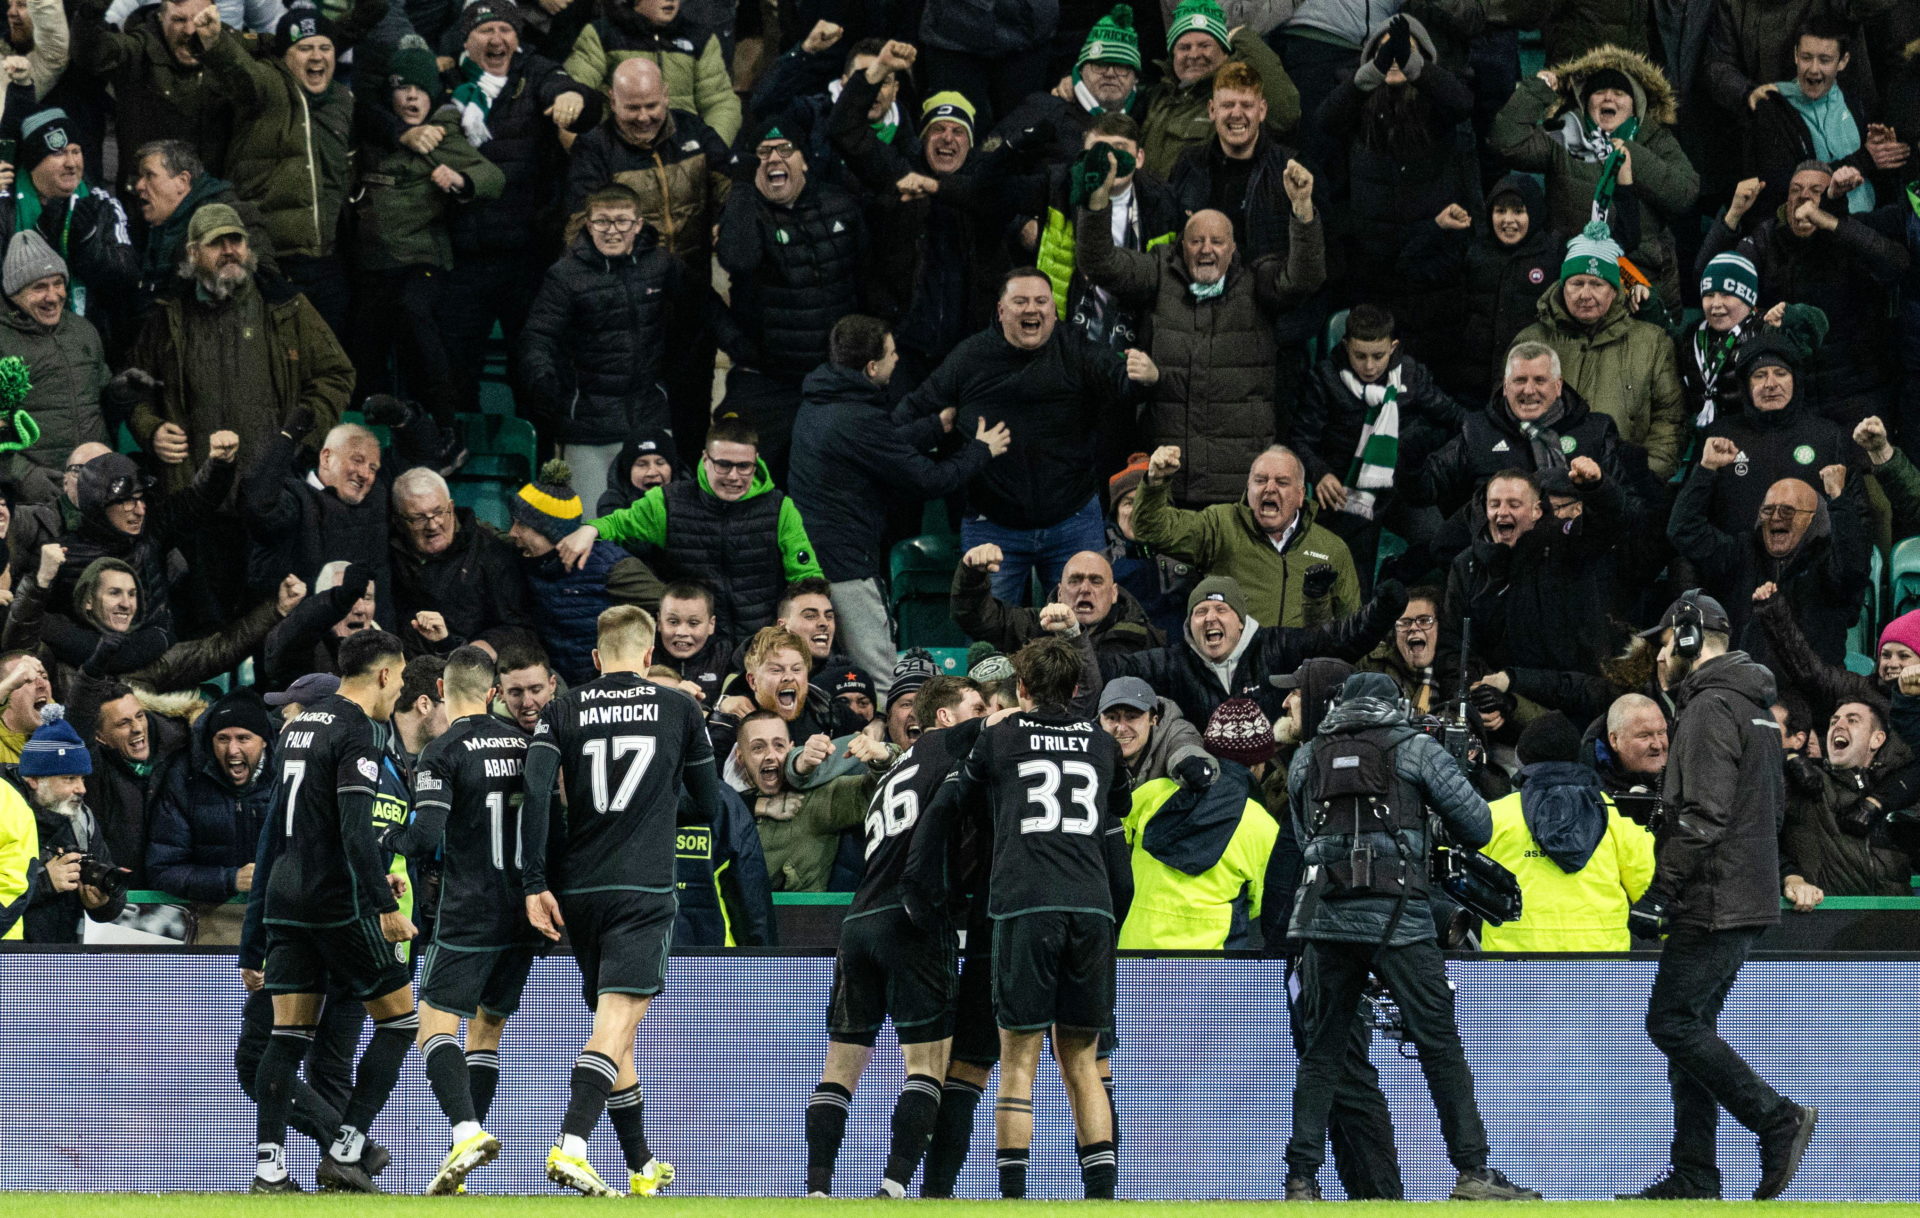 Penalty spot double from Adam Idah reinstates Celtic’s 3-point lead at the top of the table